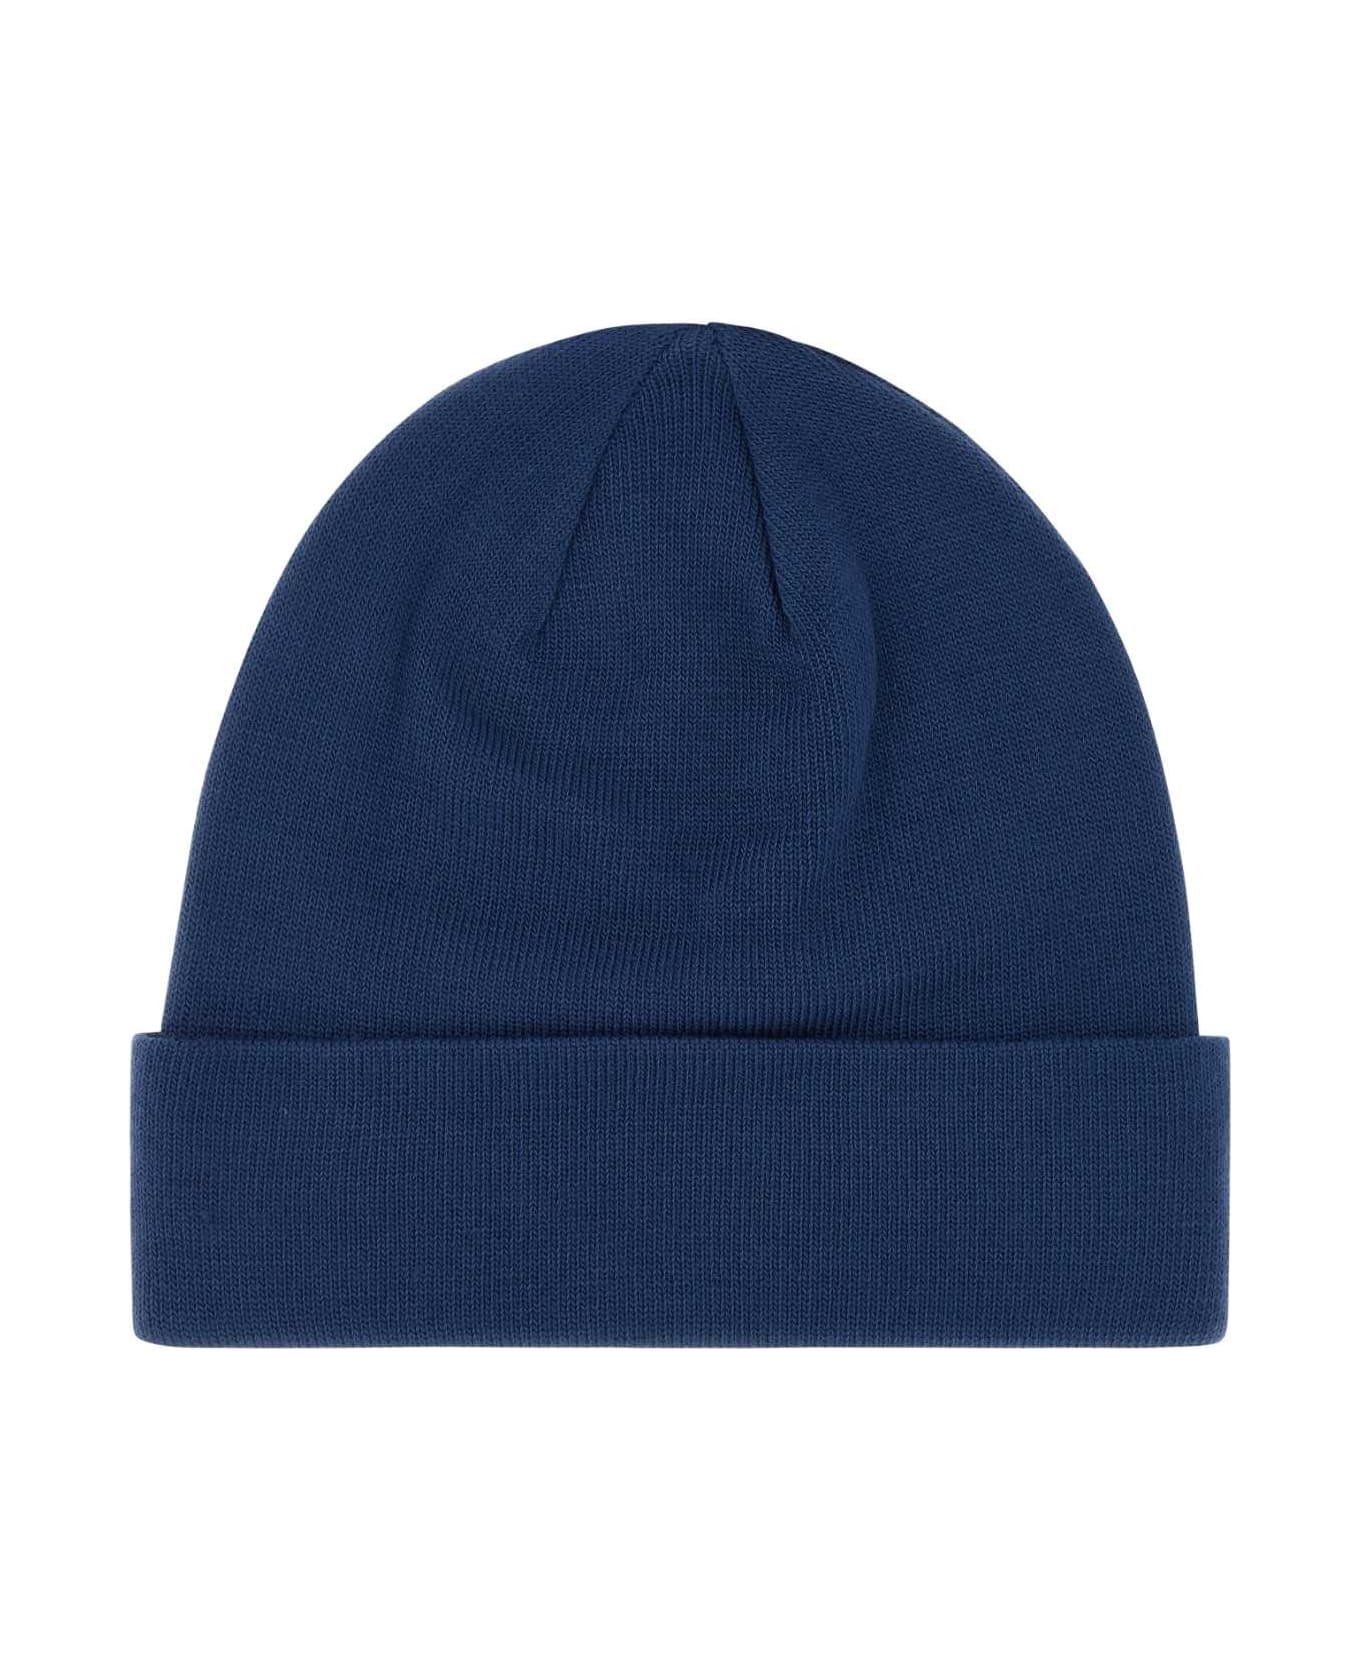 The North Face Navy Blue Stretch Polyester Blend Beanie Hat - SHADY BLUE